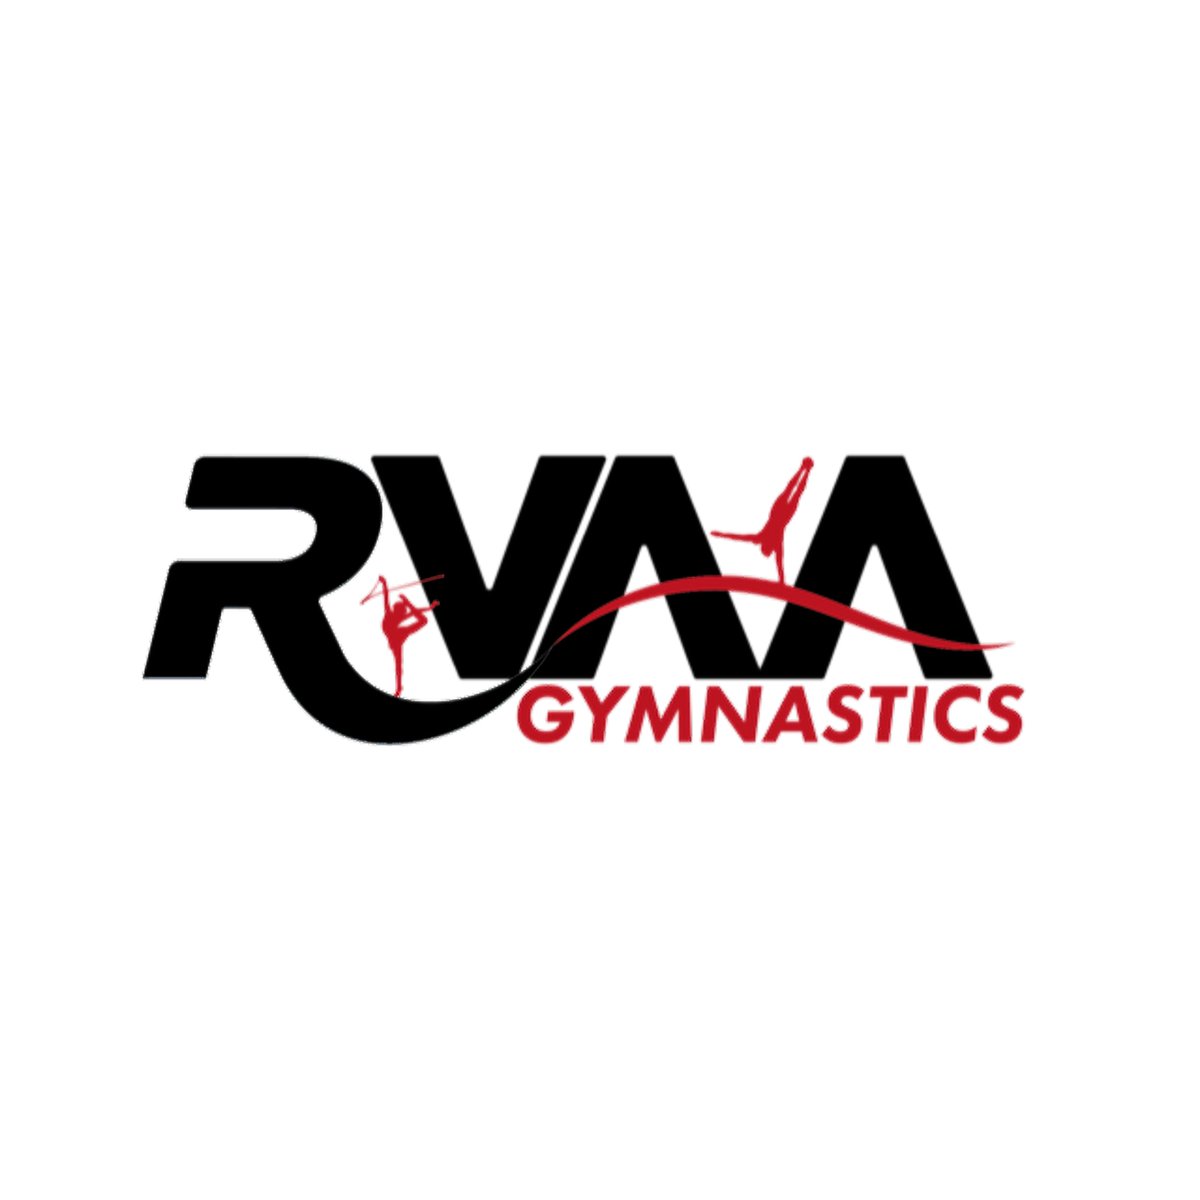 This afternoon we have the team of staff from RVAA Gymnastics onsite for their Wednesday session.

To find out more follow the link to their website...

buff.ly/3vK7CMx 

#Gymnastics #RoomHire #Blackburn #WesleyHall